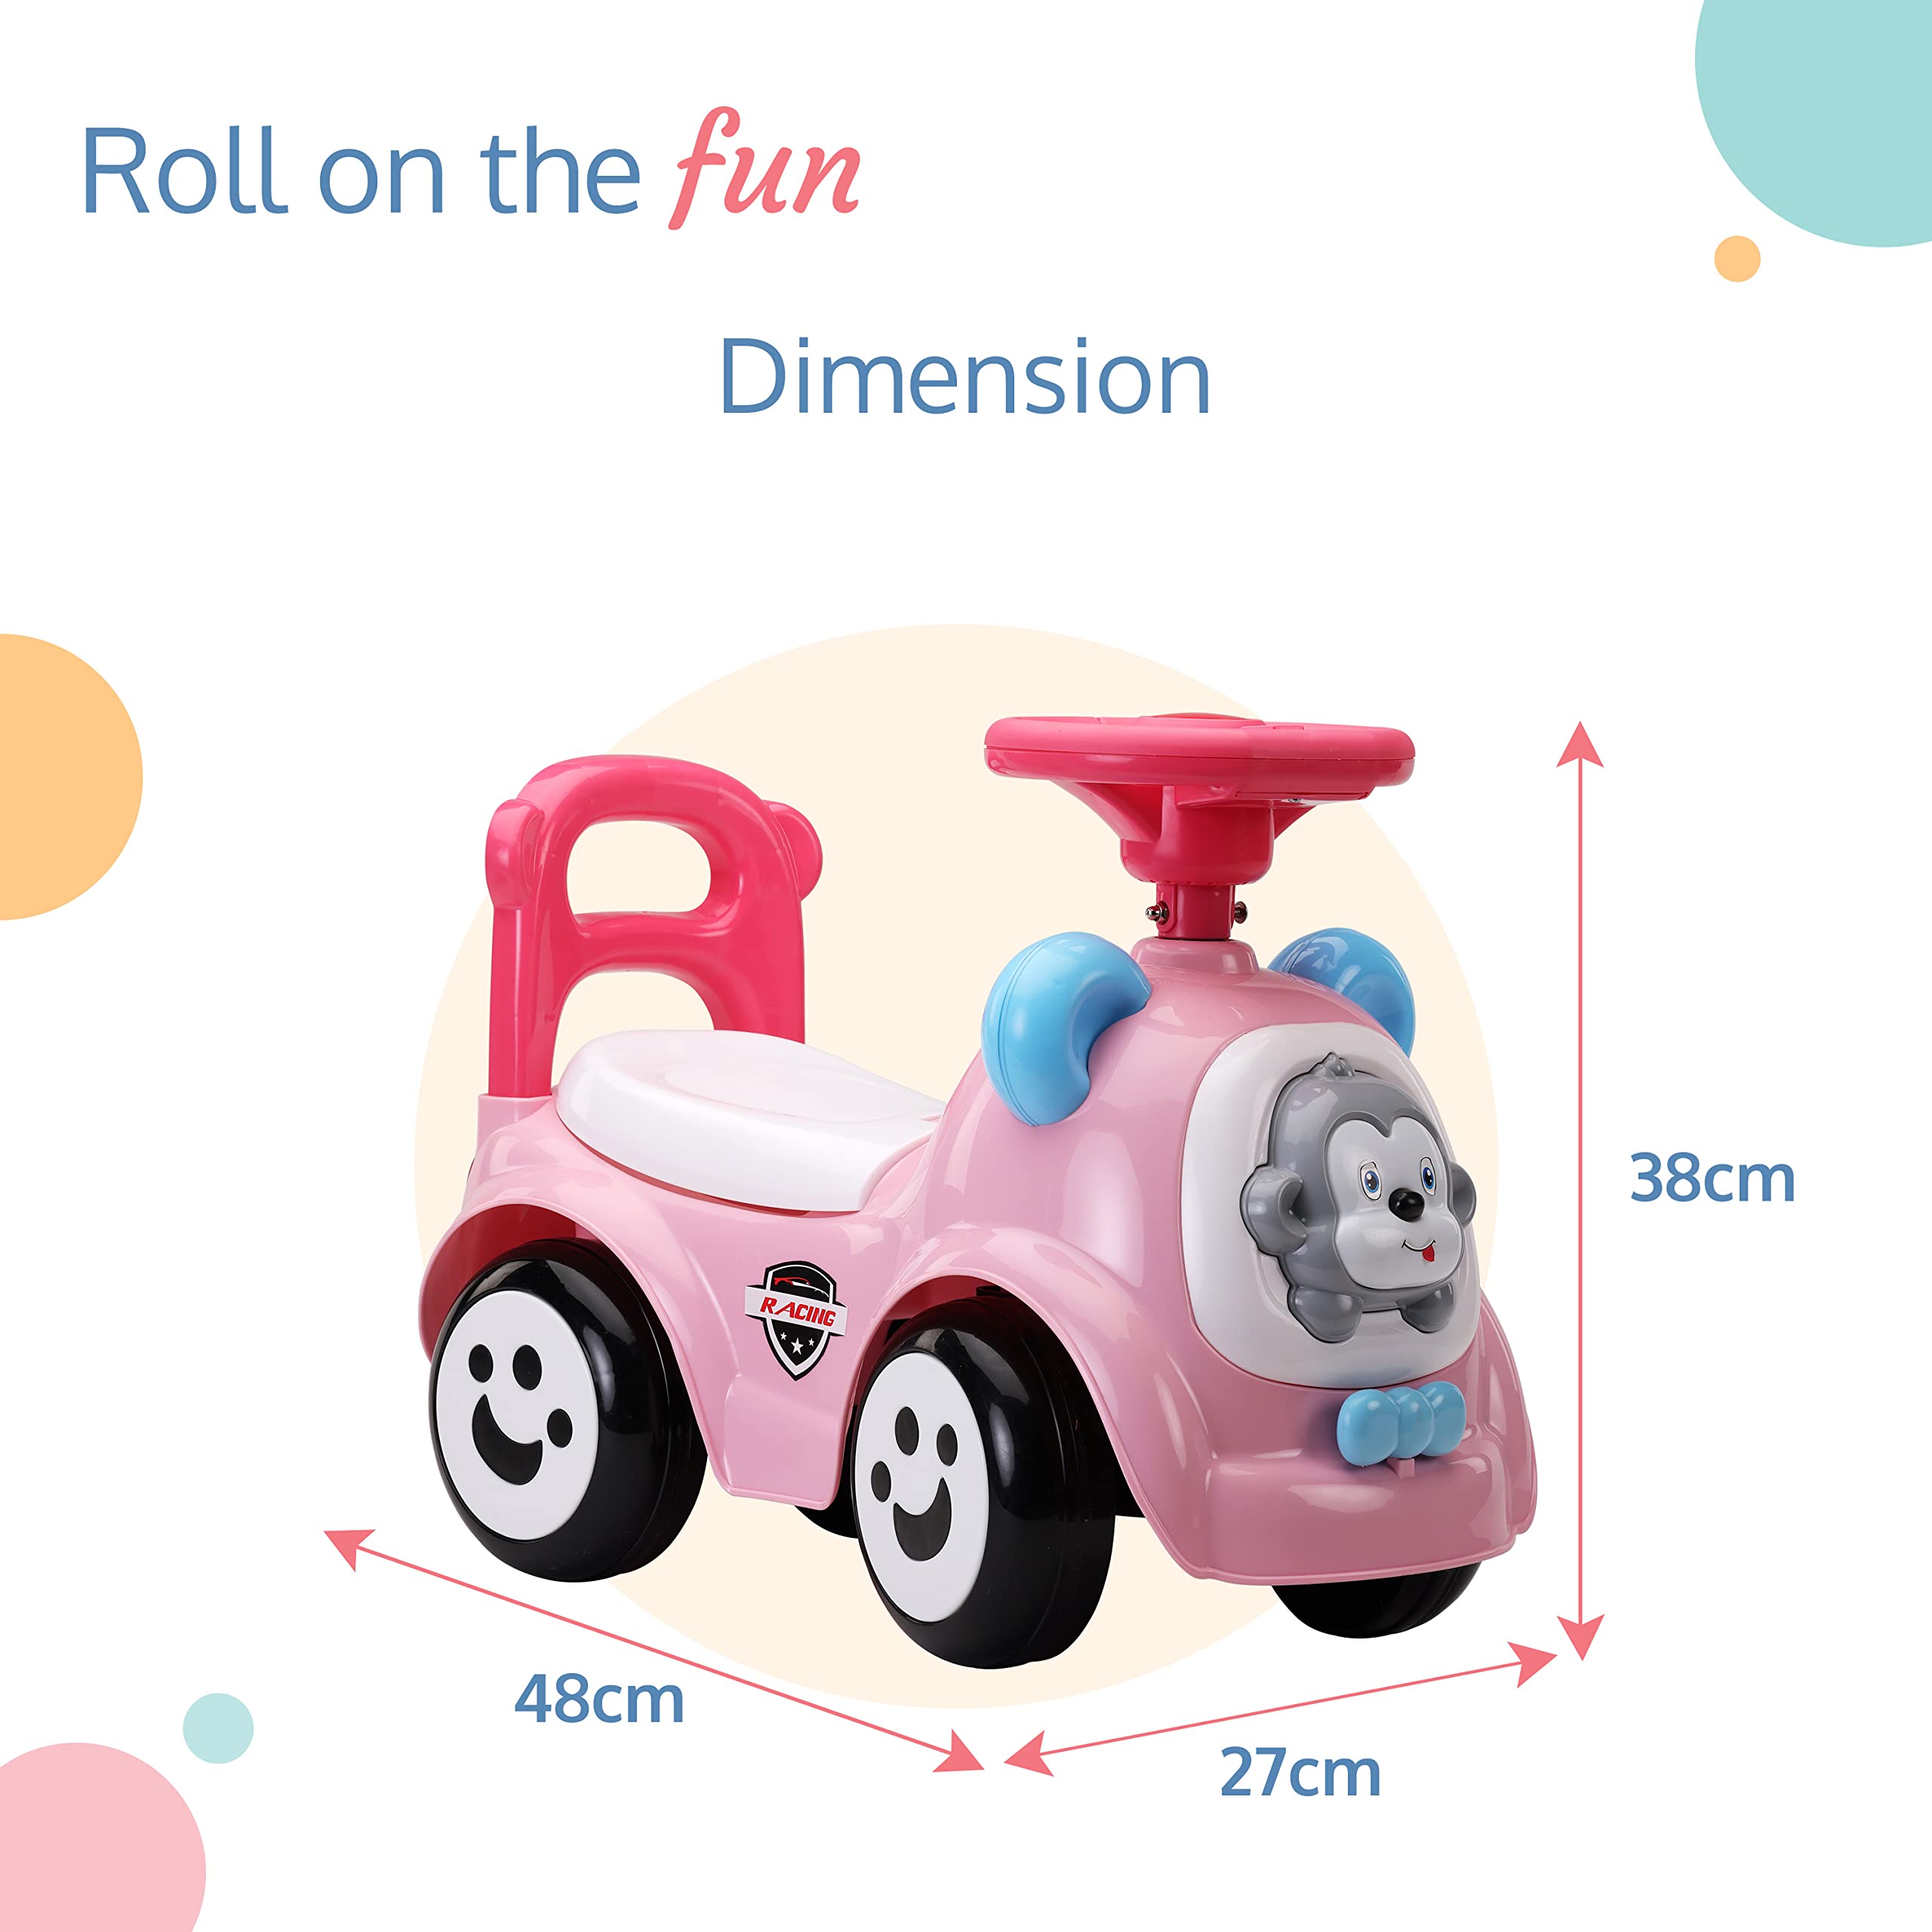 LuvLap Sunny Ride on & Car for Kids with Music & Horn Steering, Push Car for Baby with Backrest, Safety Guard, Under Seat Storage & Big Wheels, Ride on for Kids 1 to 3 Years Upto 25 Kgs (Pink)